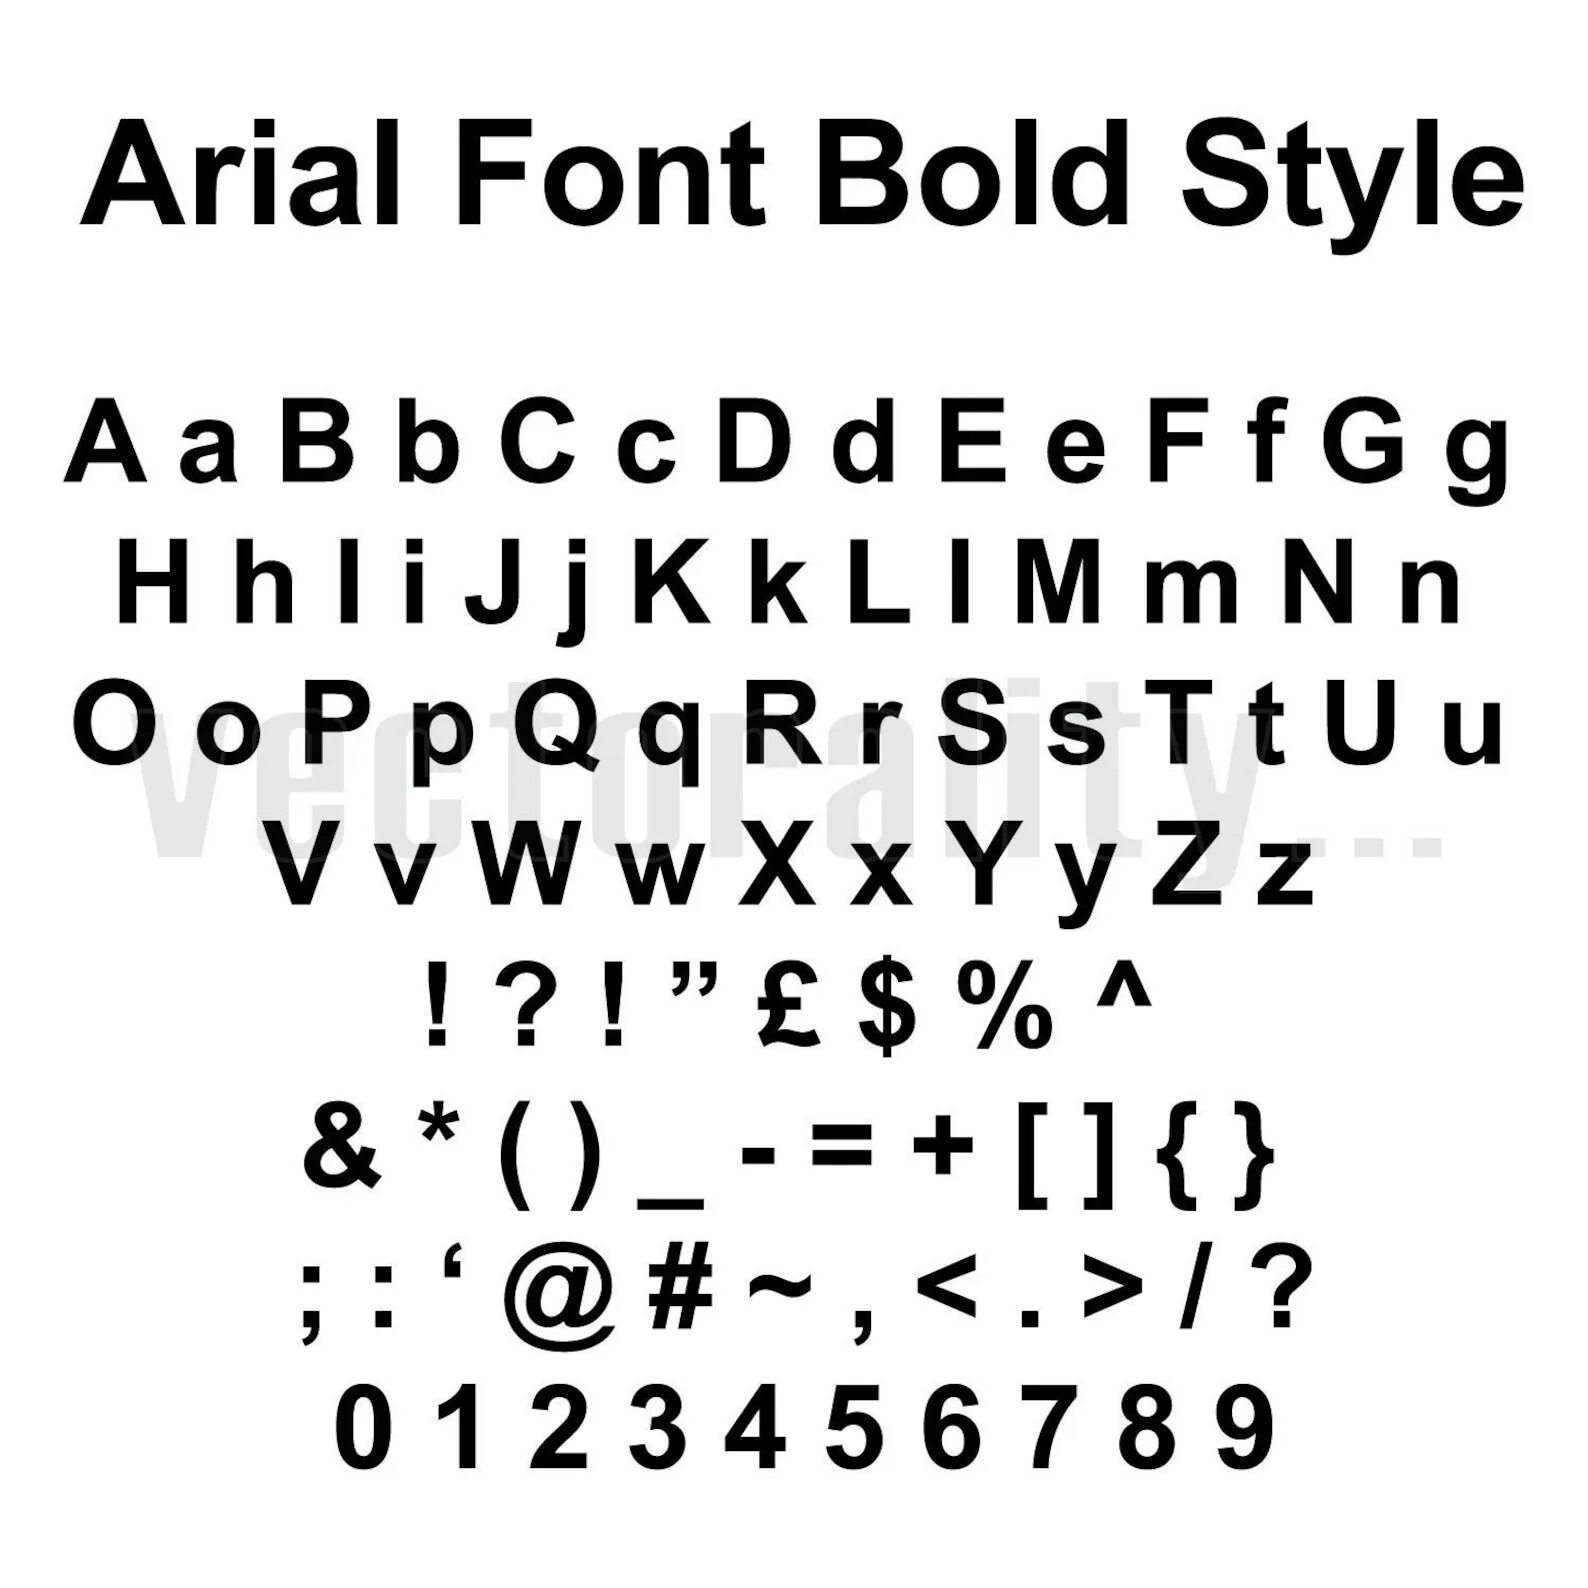 Шрифт arial bold. Arial шрифт. Шрифт arial Regular. Шрифт arial rounded. Полужирный шрифт arial.